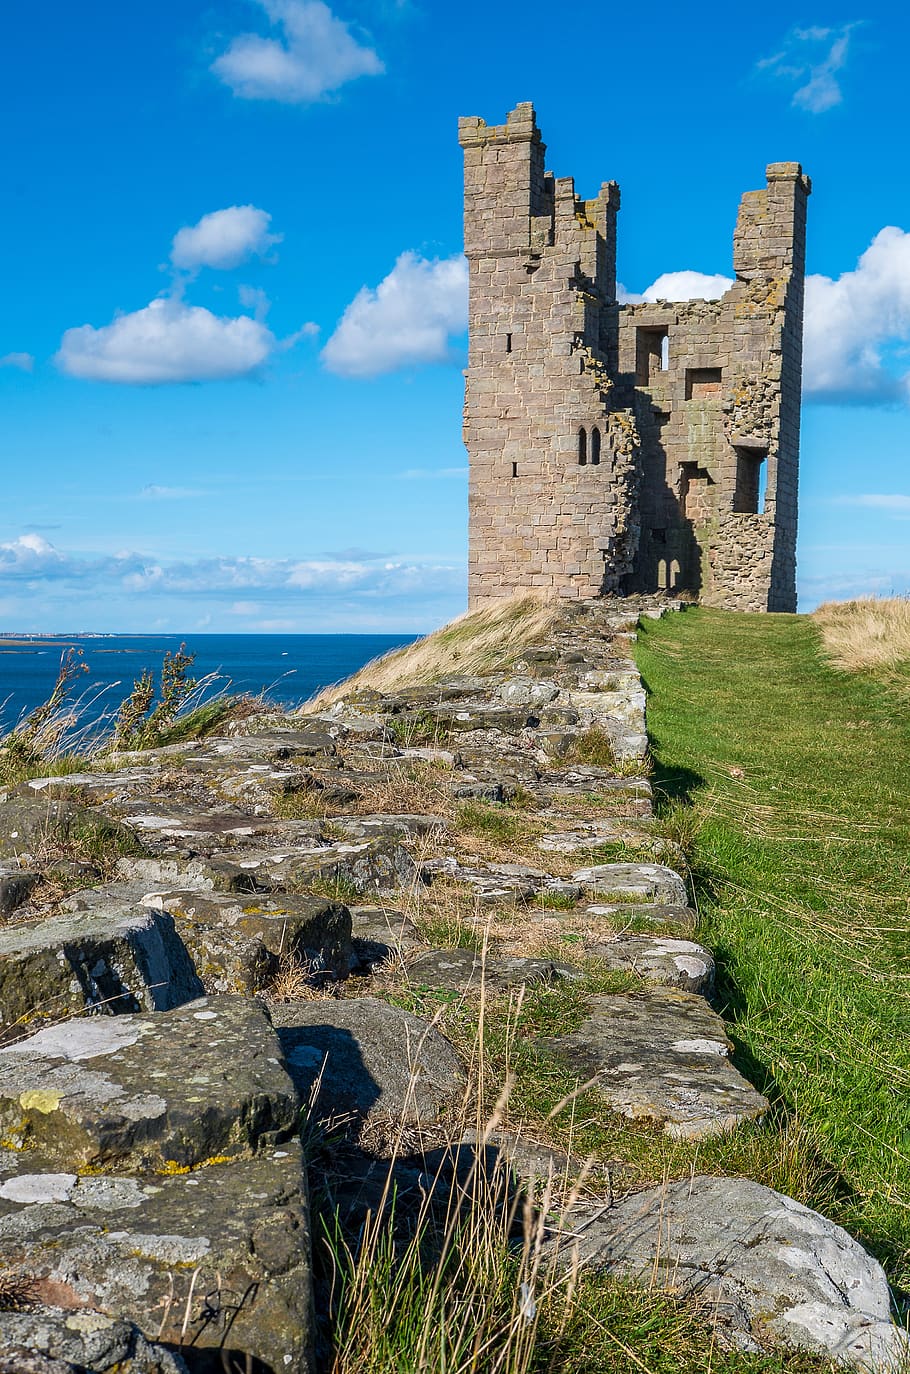 dunstanburgh castle, ruin, tower, castle, middle ages, sky, stone, historically, england, places of interest